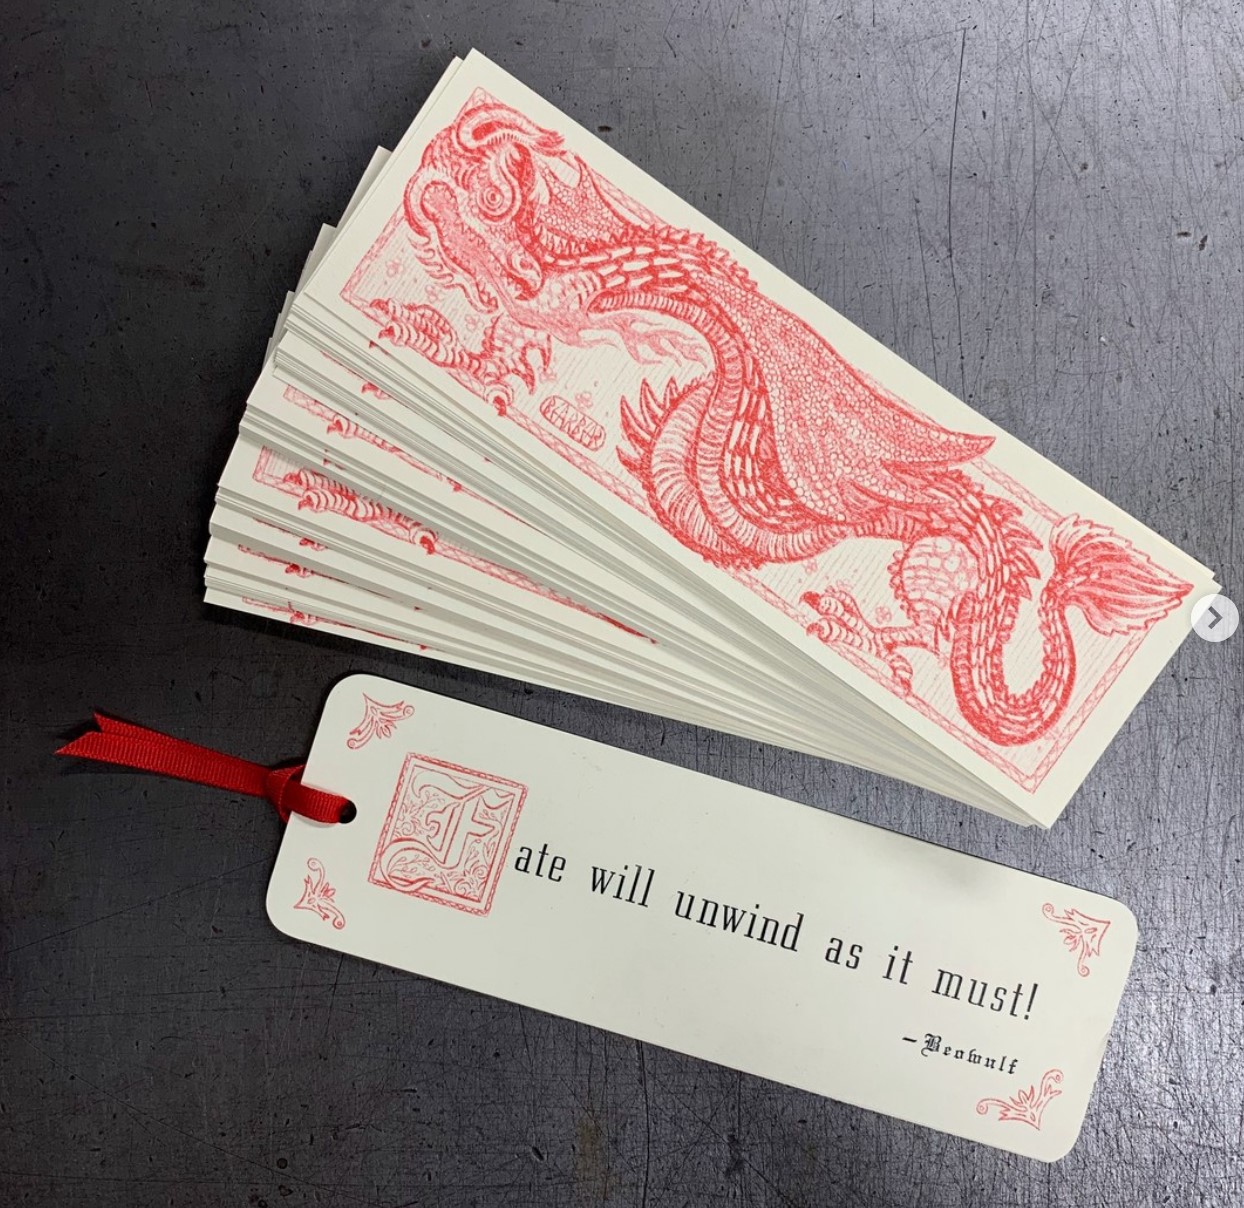 A bookmark with text and a dragon